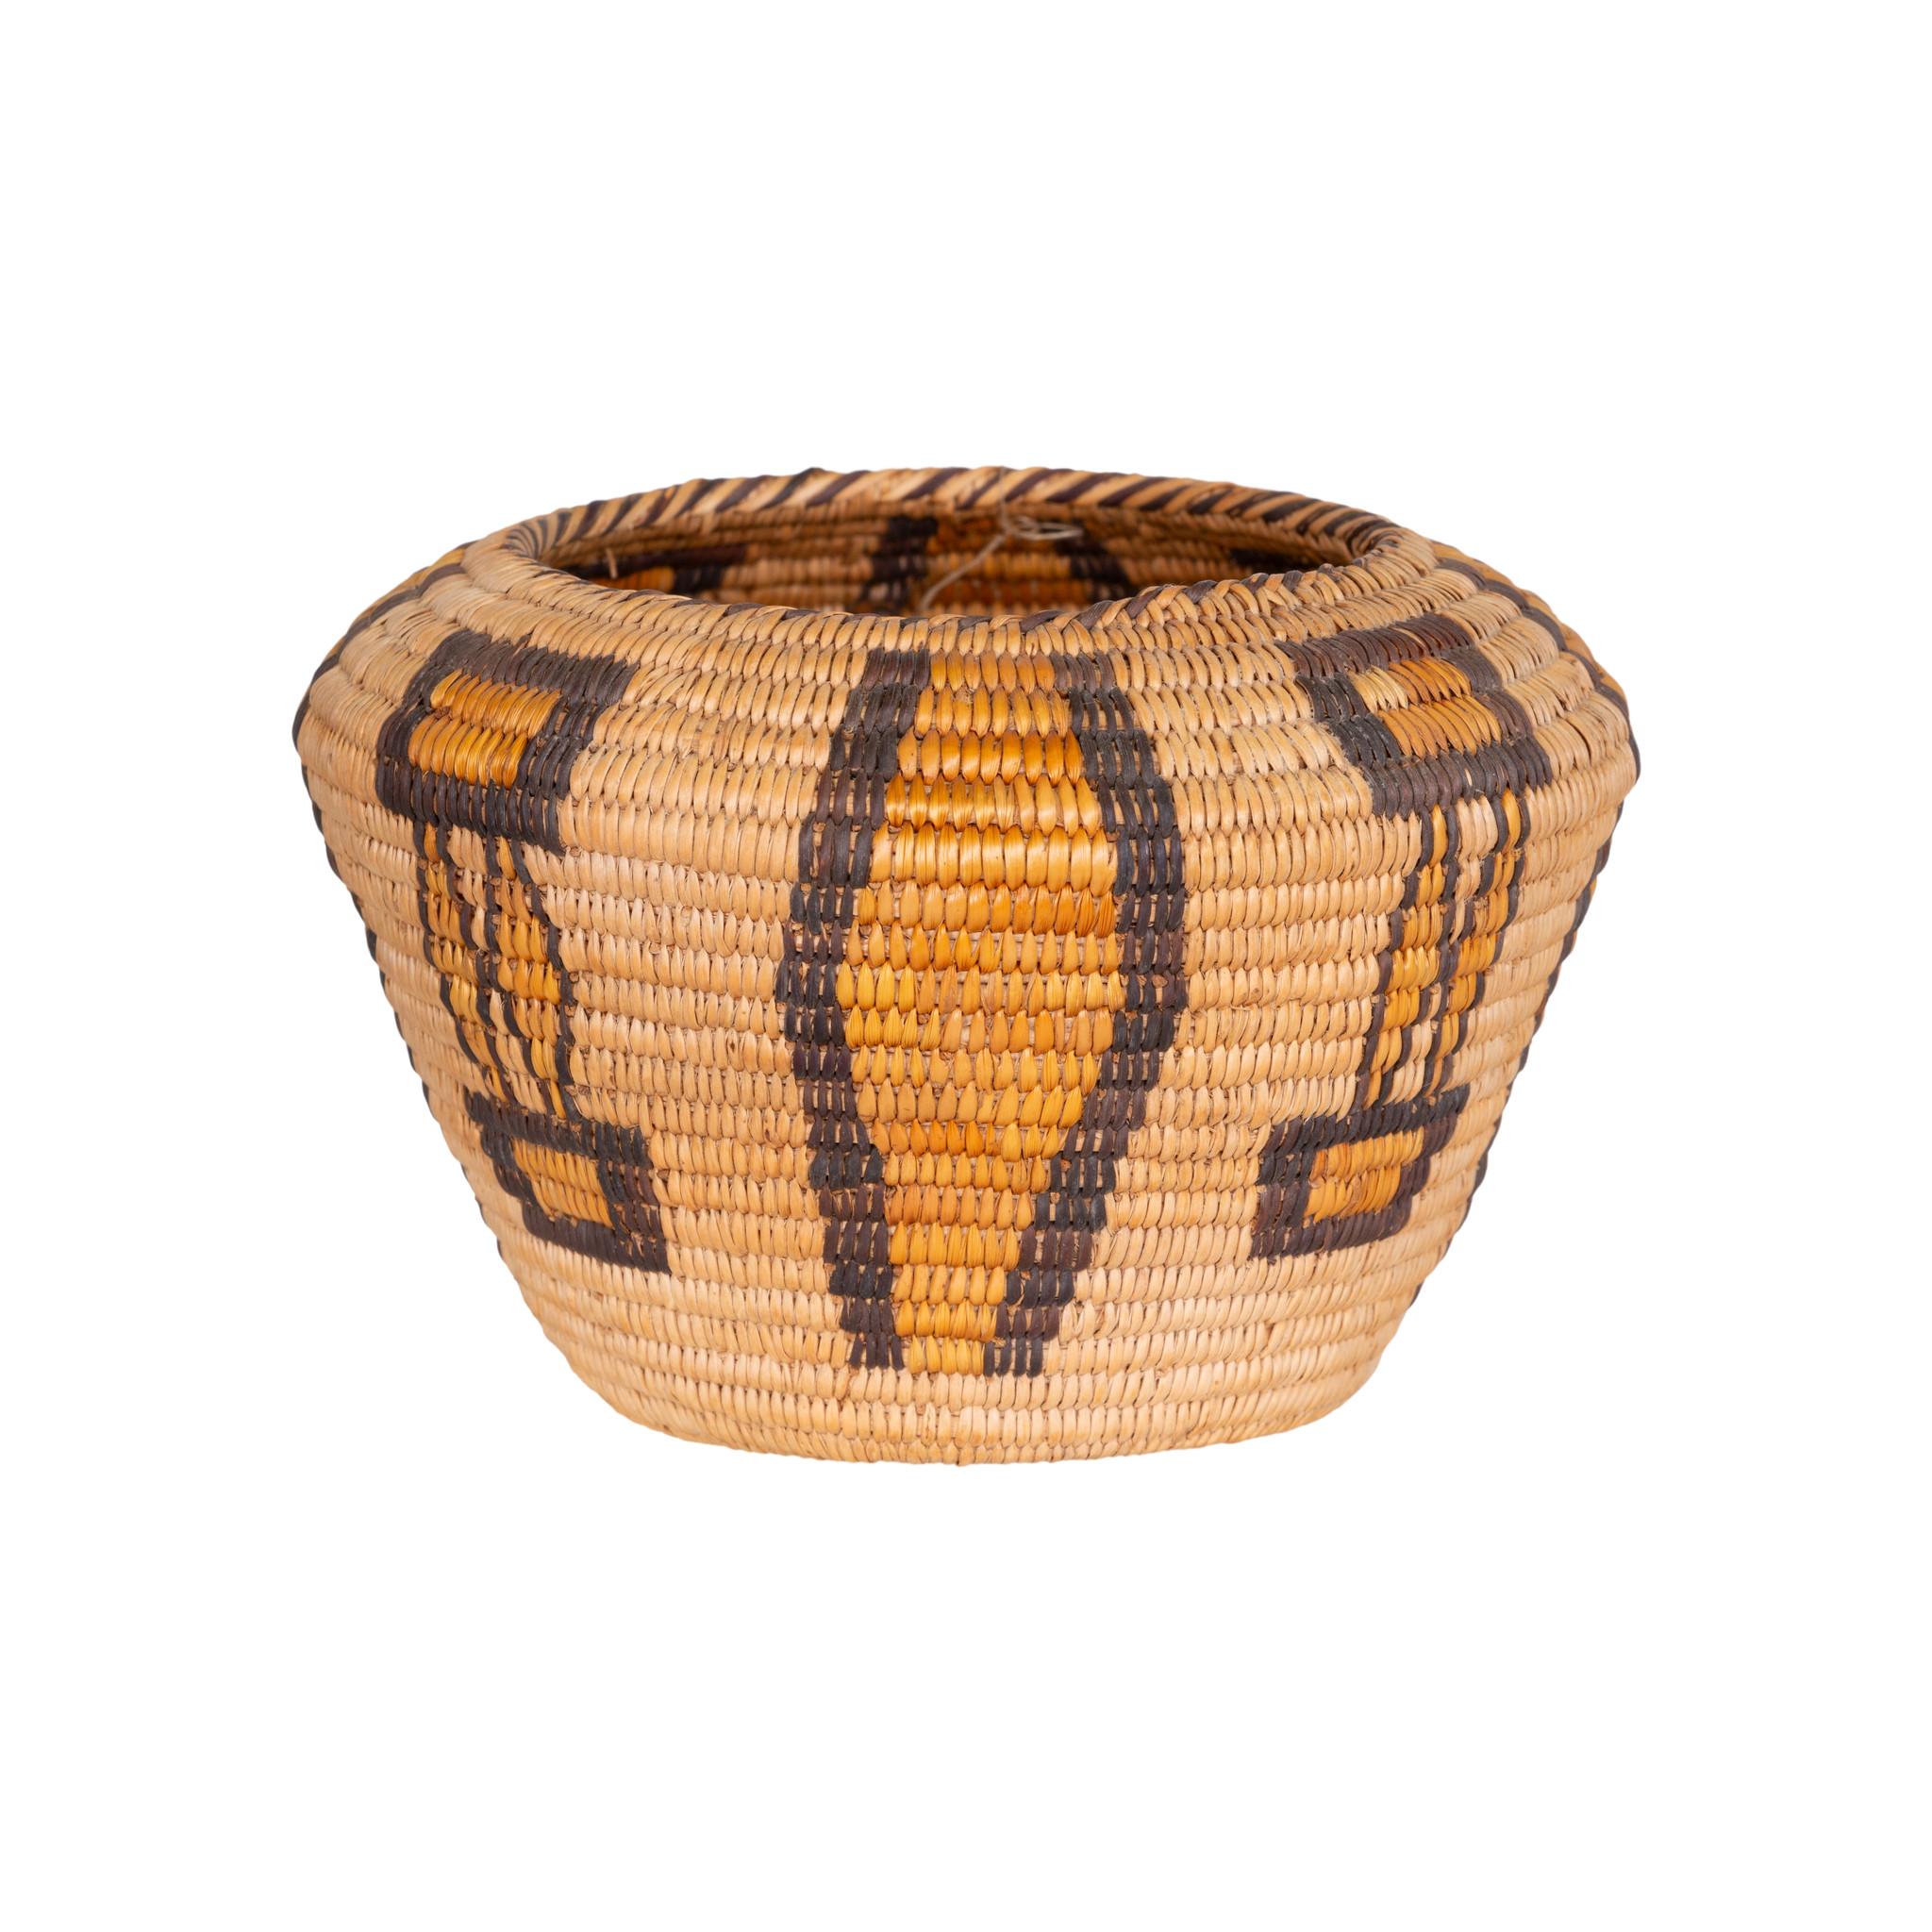 Polychrome pictorial Panamint basket with stylized butterflies, very finely woven.

Period: Last quarter 19th century

Origin: Panamint

Size: 4